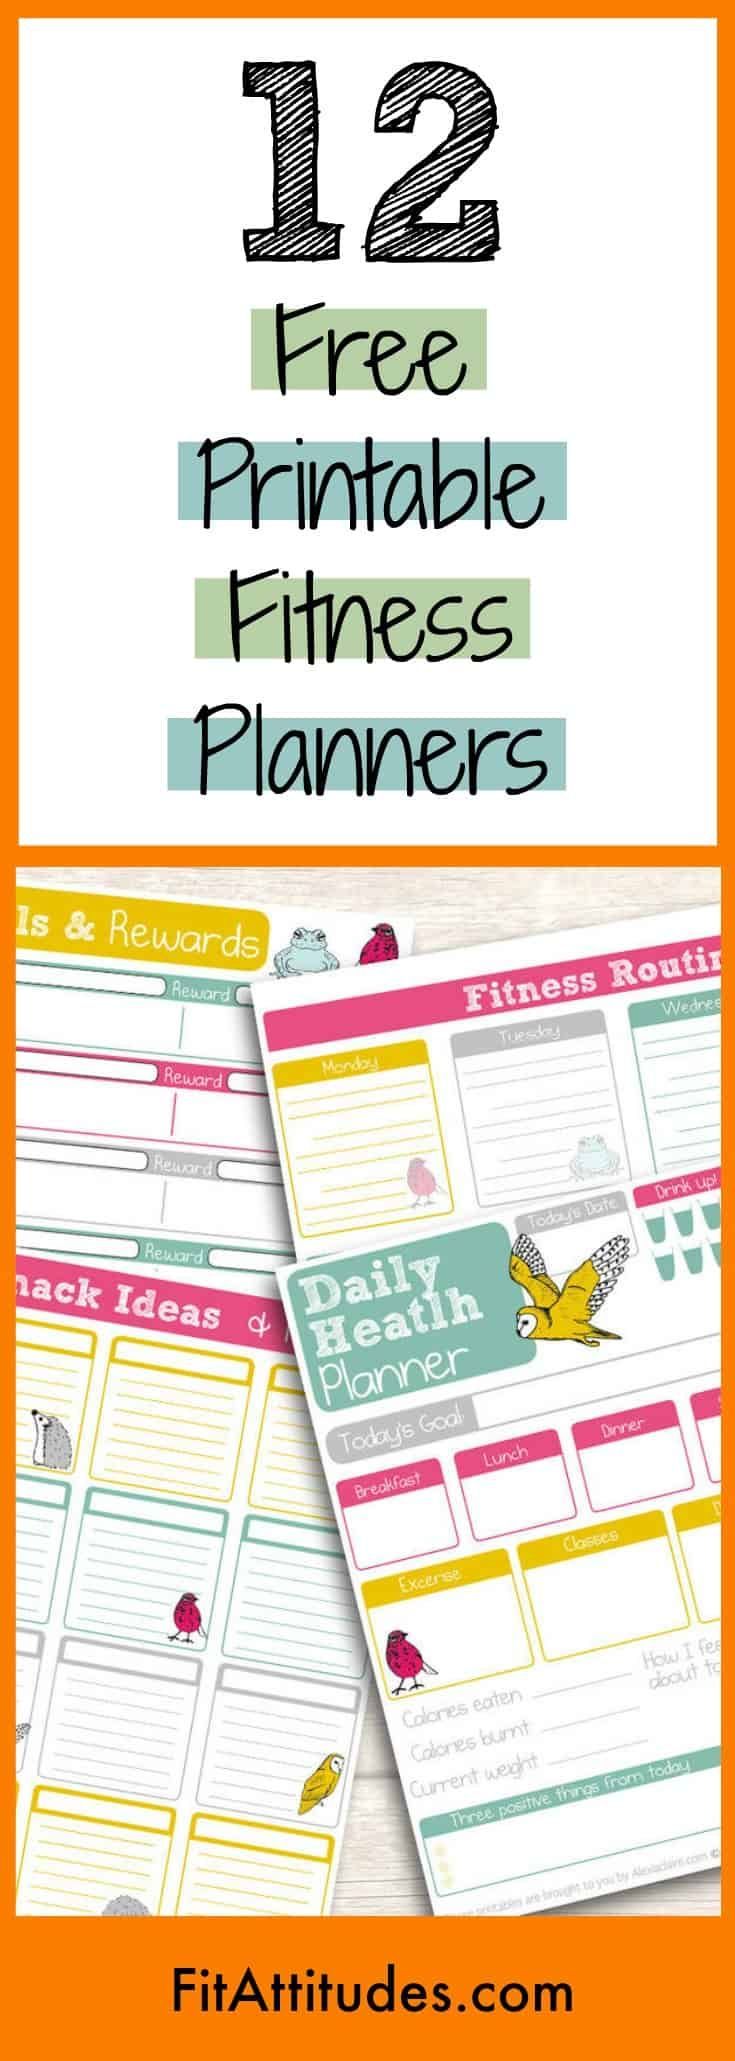 Free Printable Fitness Planners | Fit Attitudes | 21 Day Planners -   16 fitness Journal printable ideas